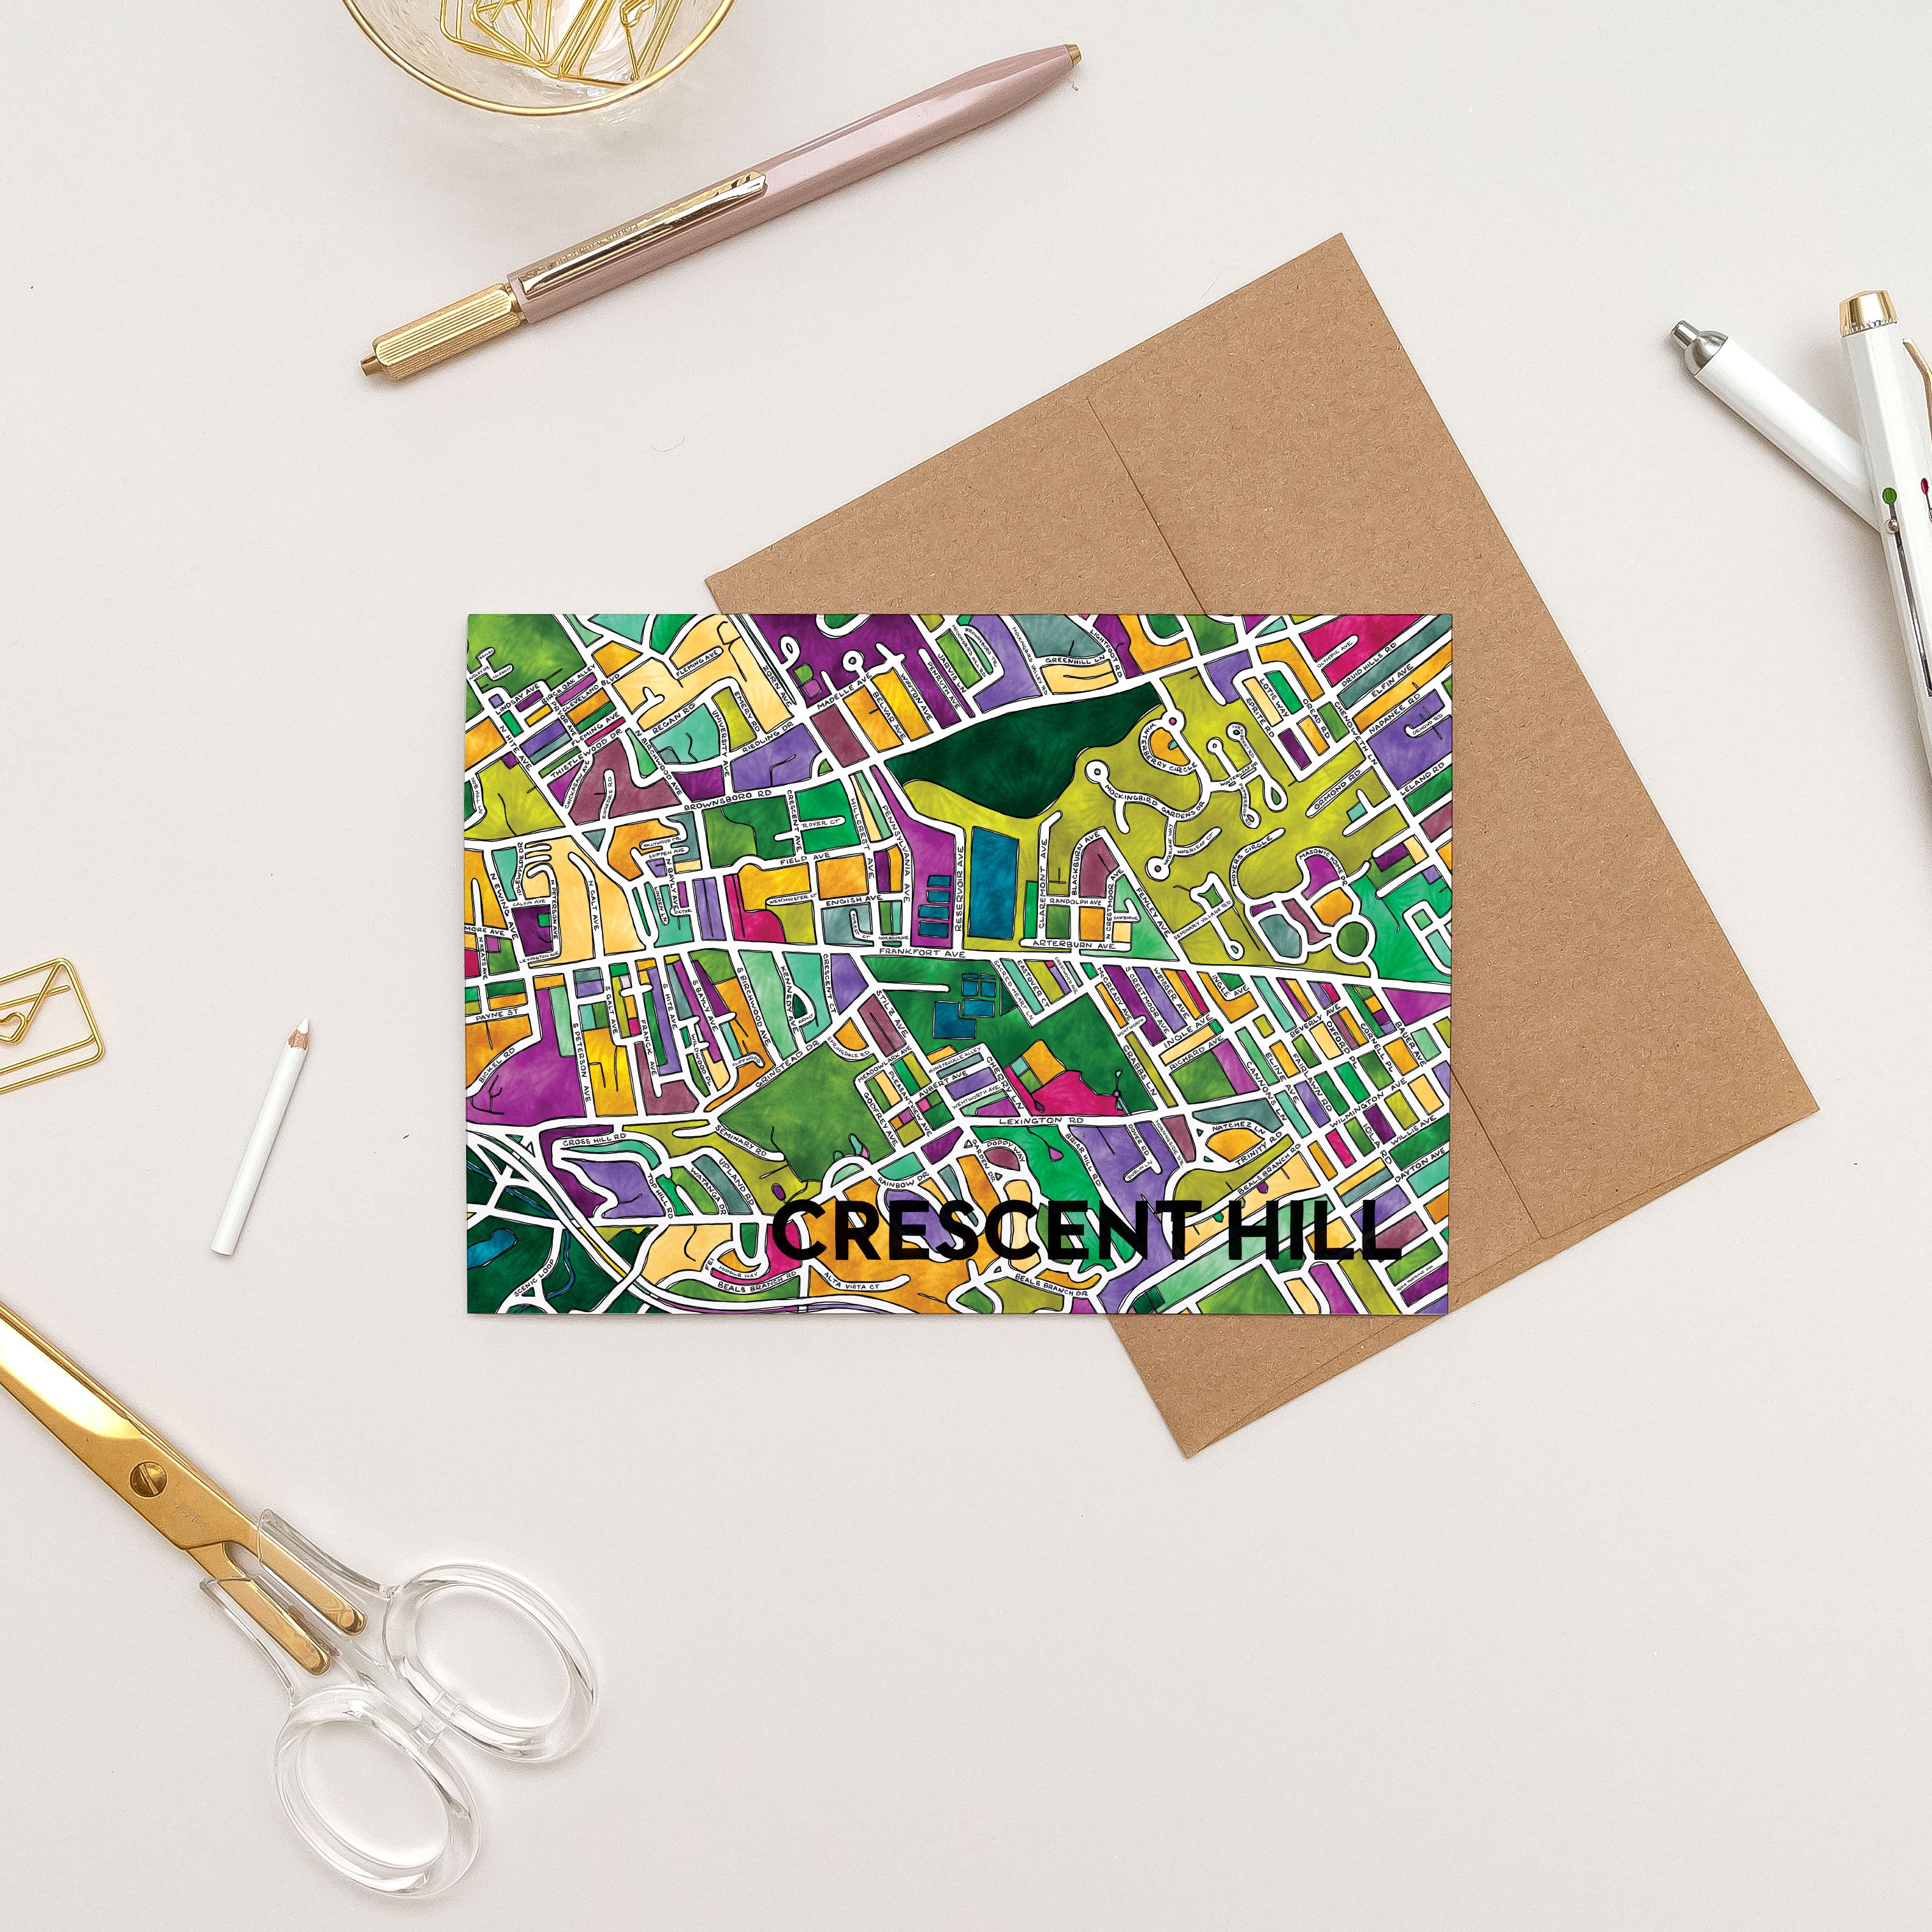 Crescent Hill (Louisville) Greeting Card